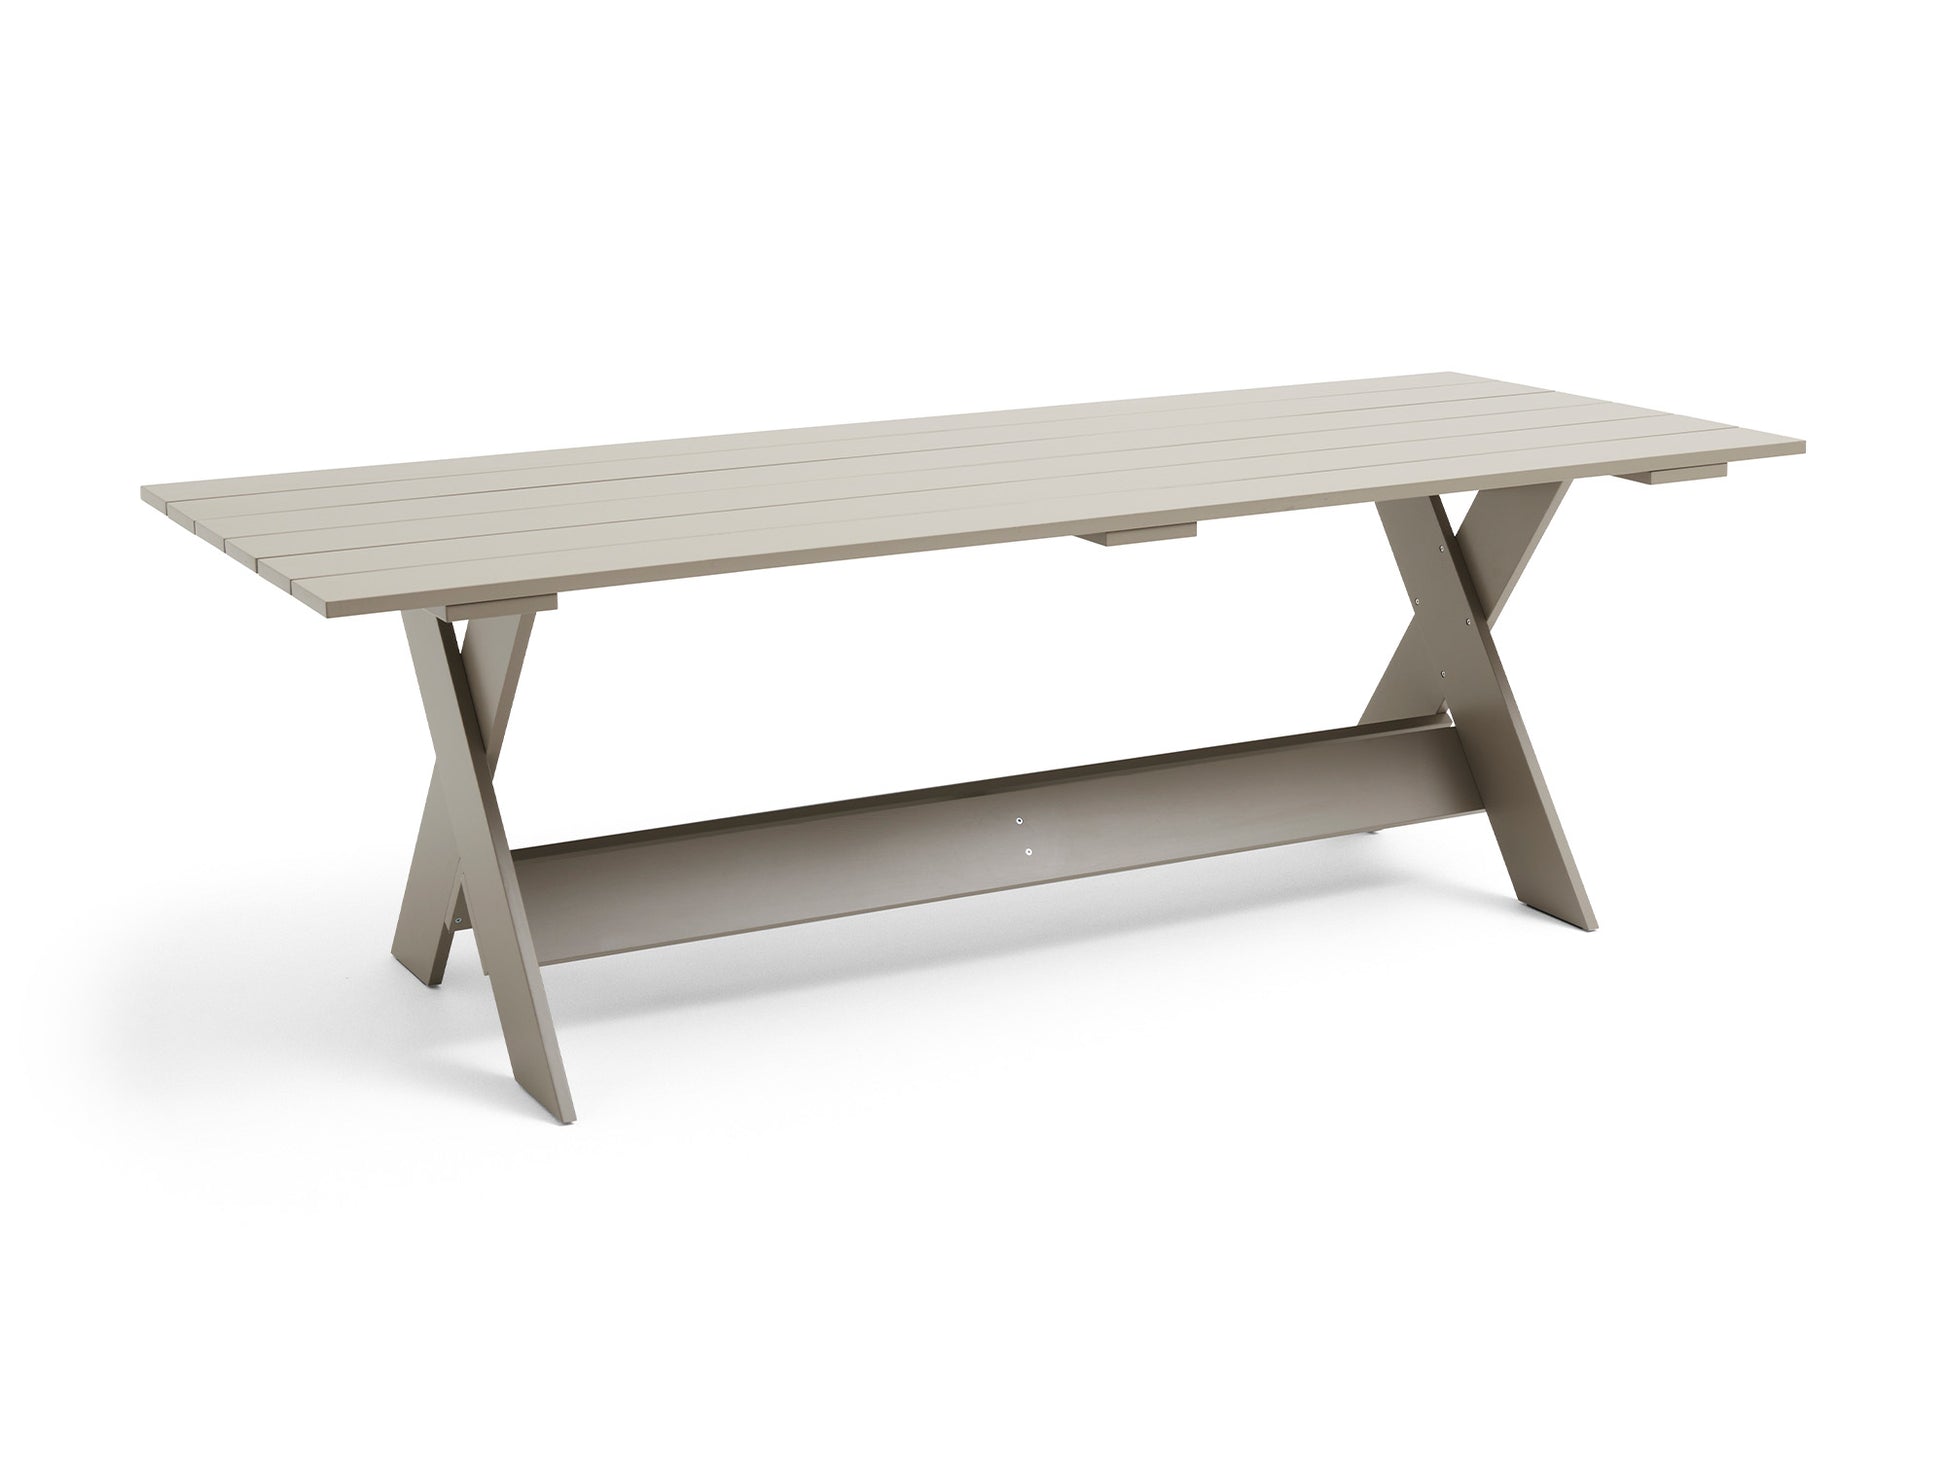 Crate Dining Table by HAY - Length: 230 cm / London Fog Lacquered Pinewood